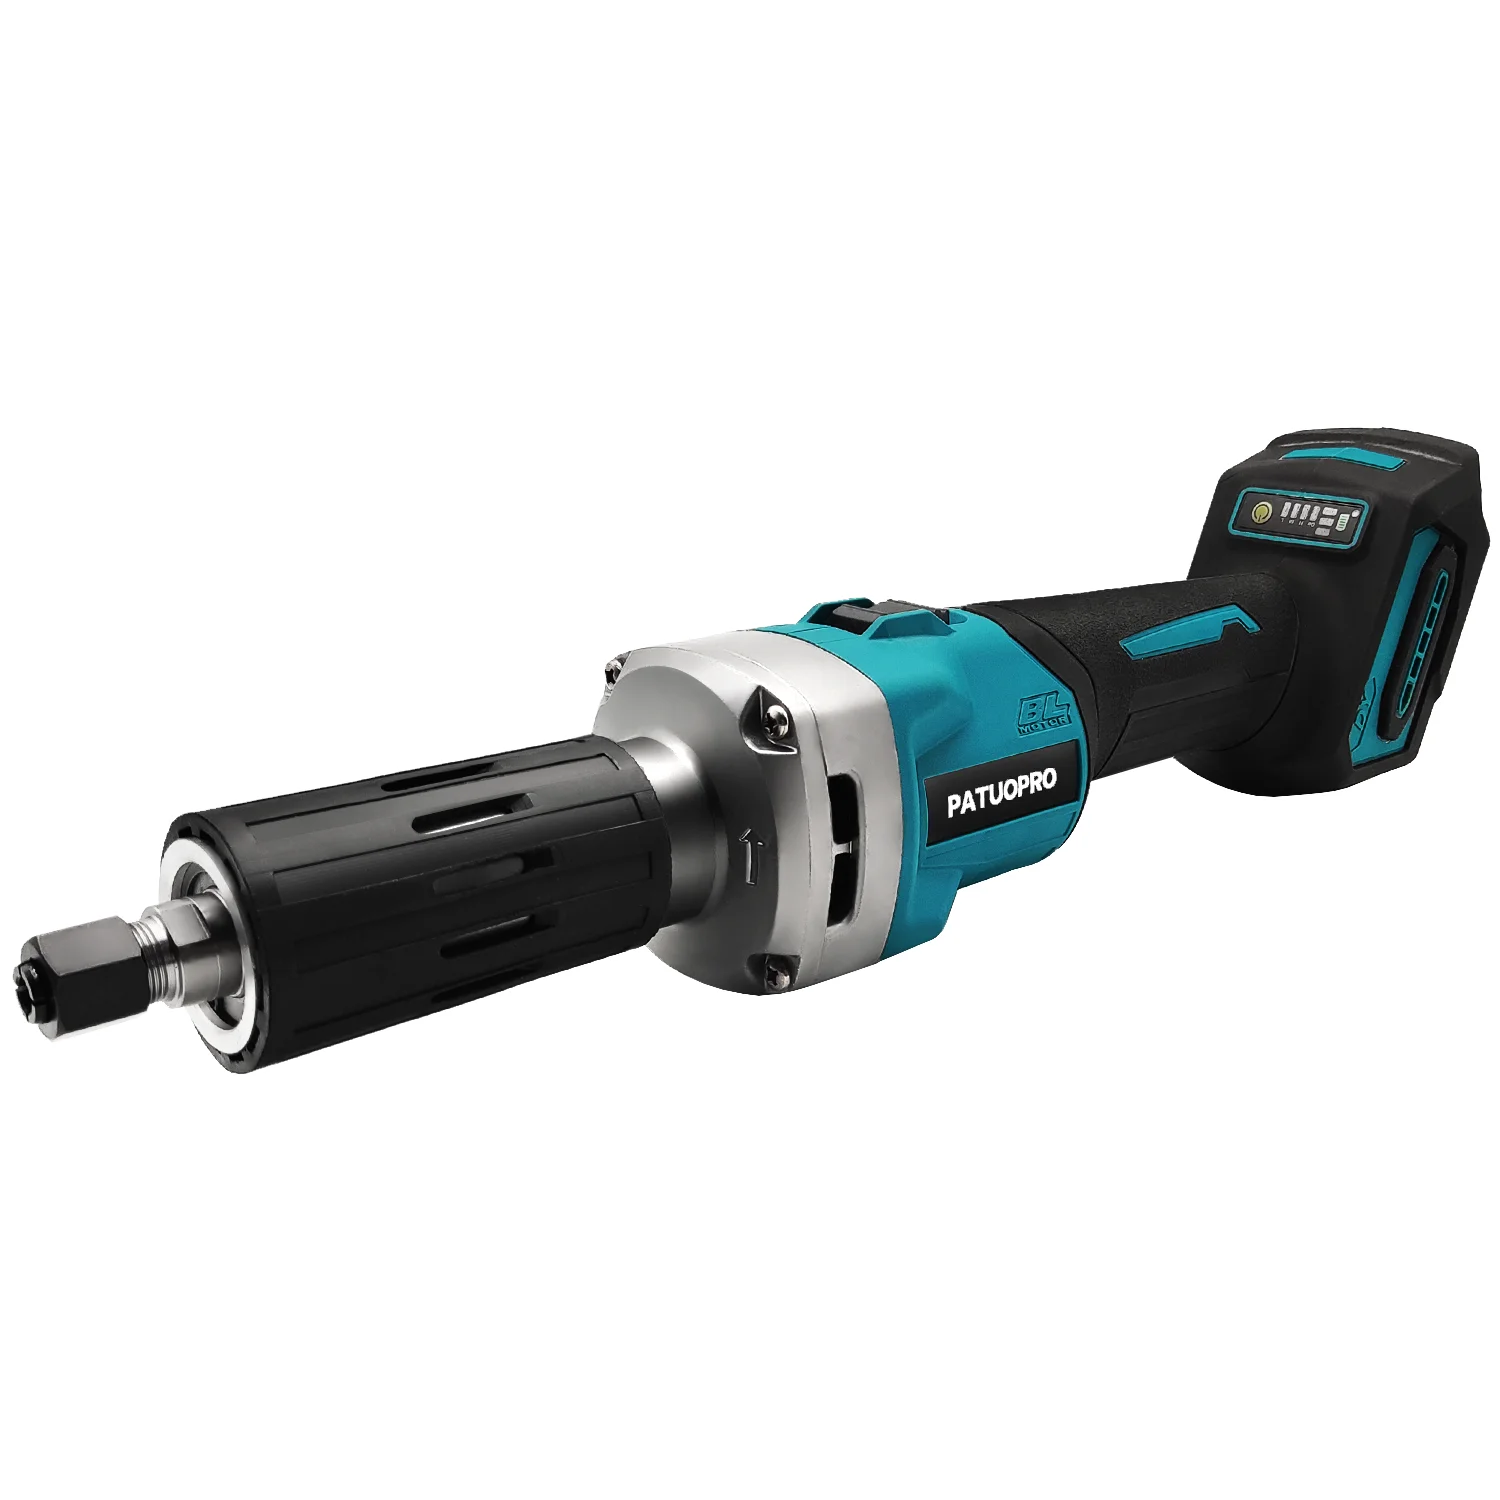 

18V Cordless Brushless Die Grinder 6mm Electric Engraving Tool Variable Speed fit Makita 18v Battery(No Battery)